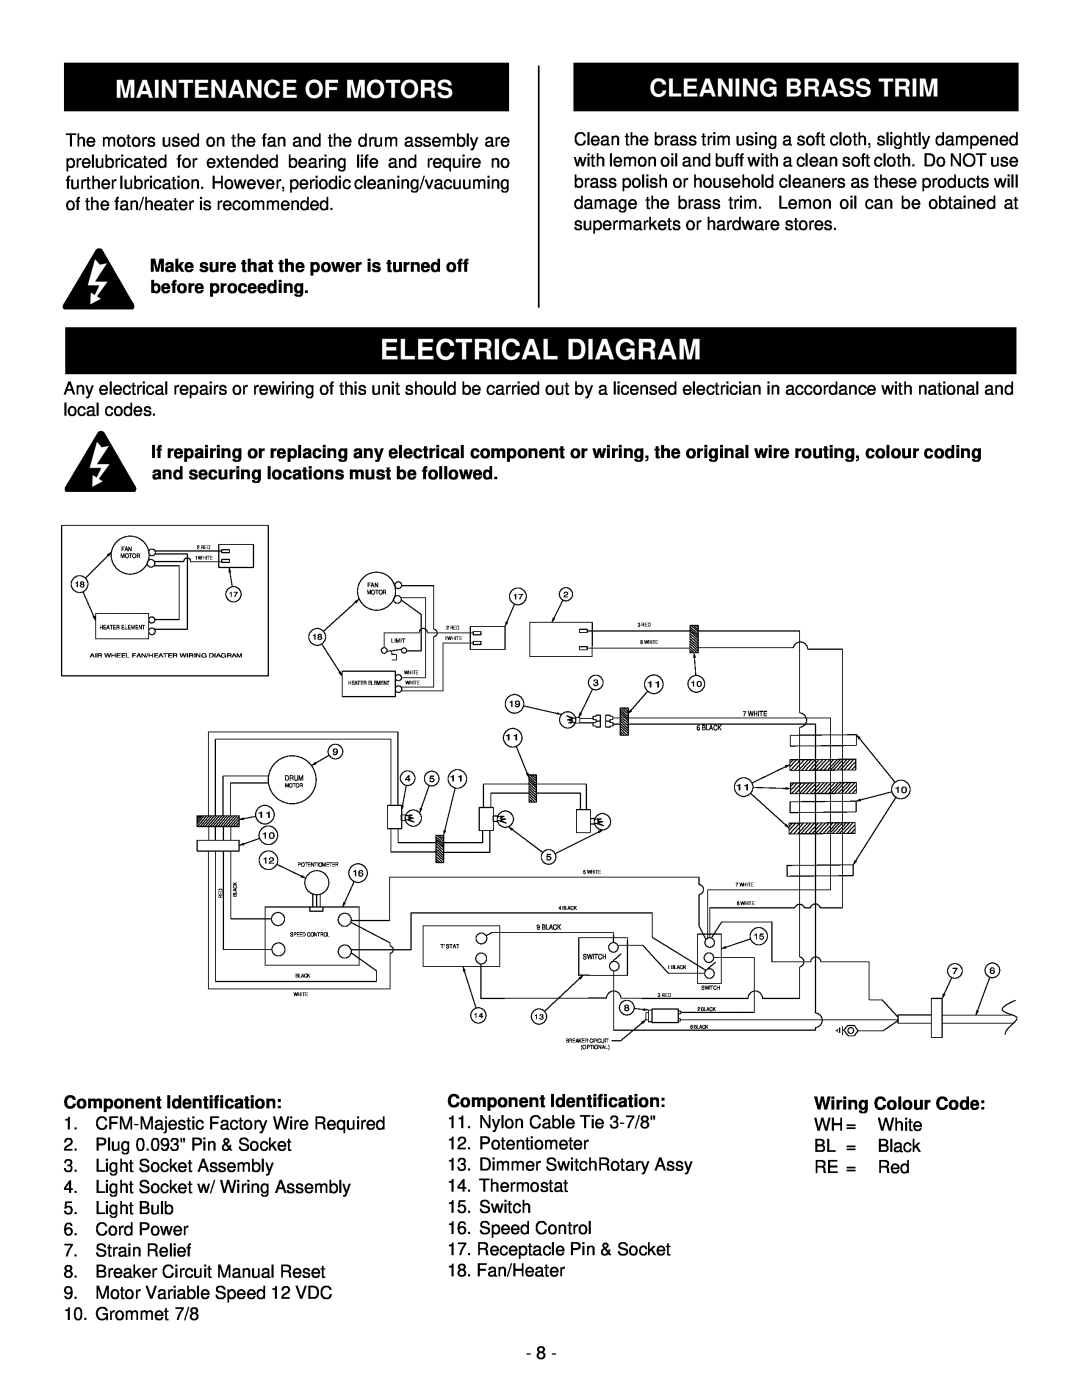 Majestic Appliances HE32EF installation instructions Electrical Diagram, Maintenance Of Motors, Cleaning Brass Trim 